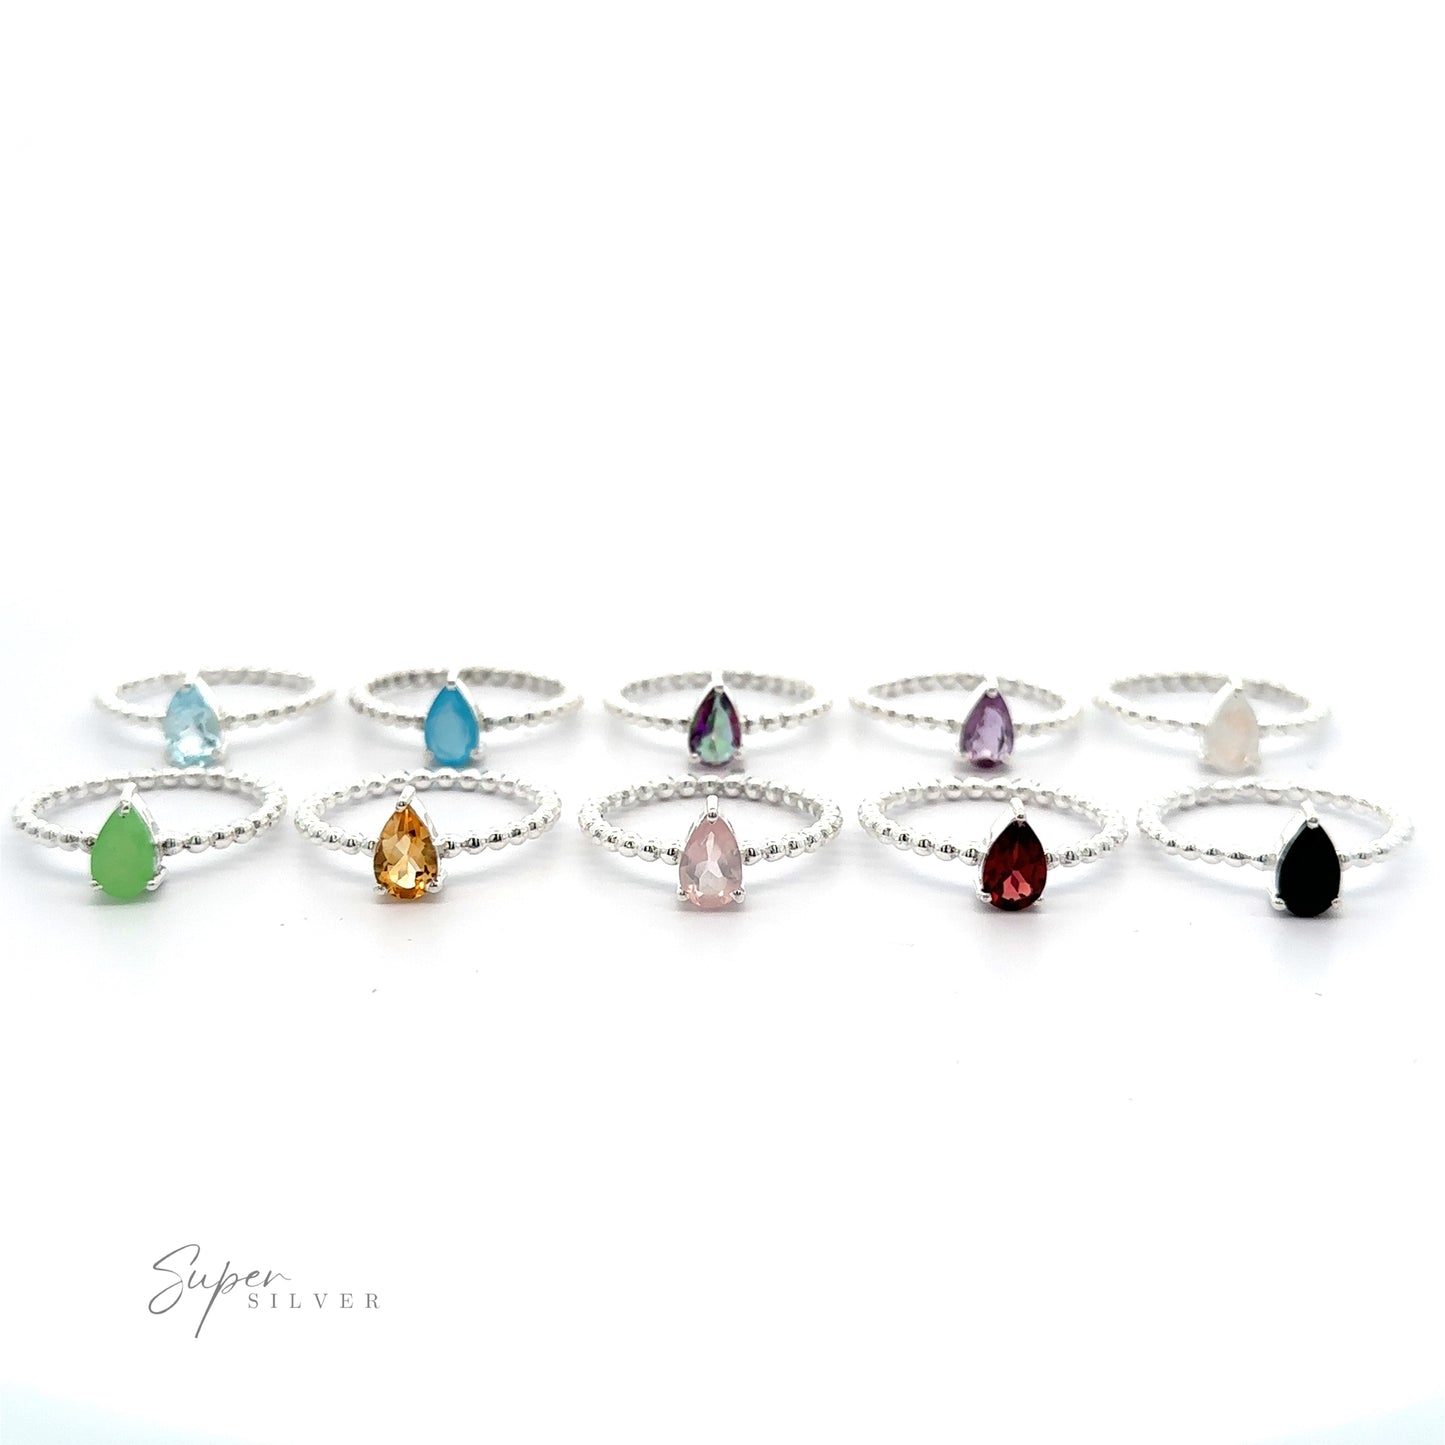 
                  
                    A collection of Sparkling Teardrop Gemstone on Beaded Band rings with various colored teardrop gemstones, displayed against a white background.
                  
                